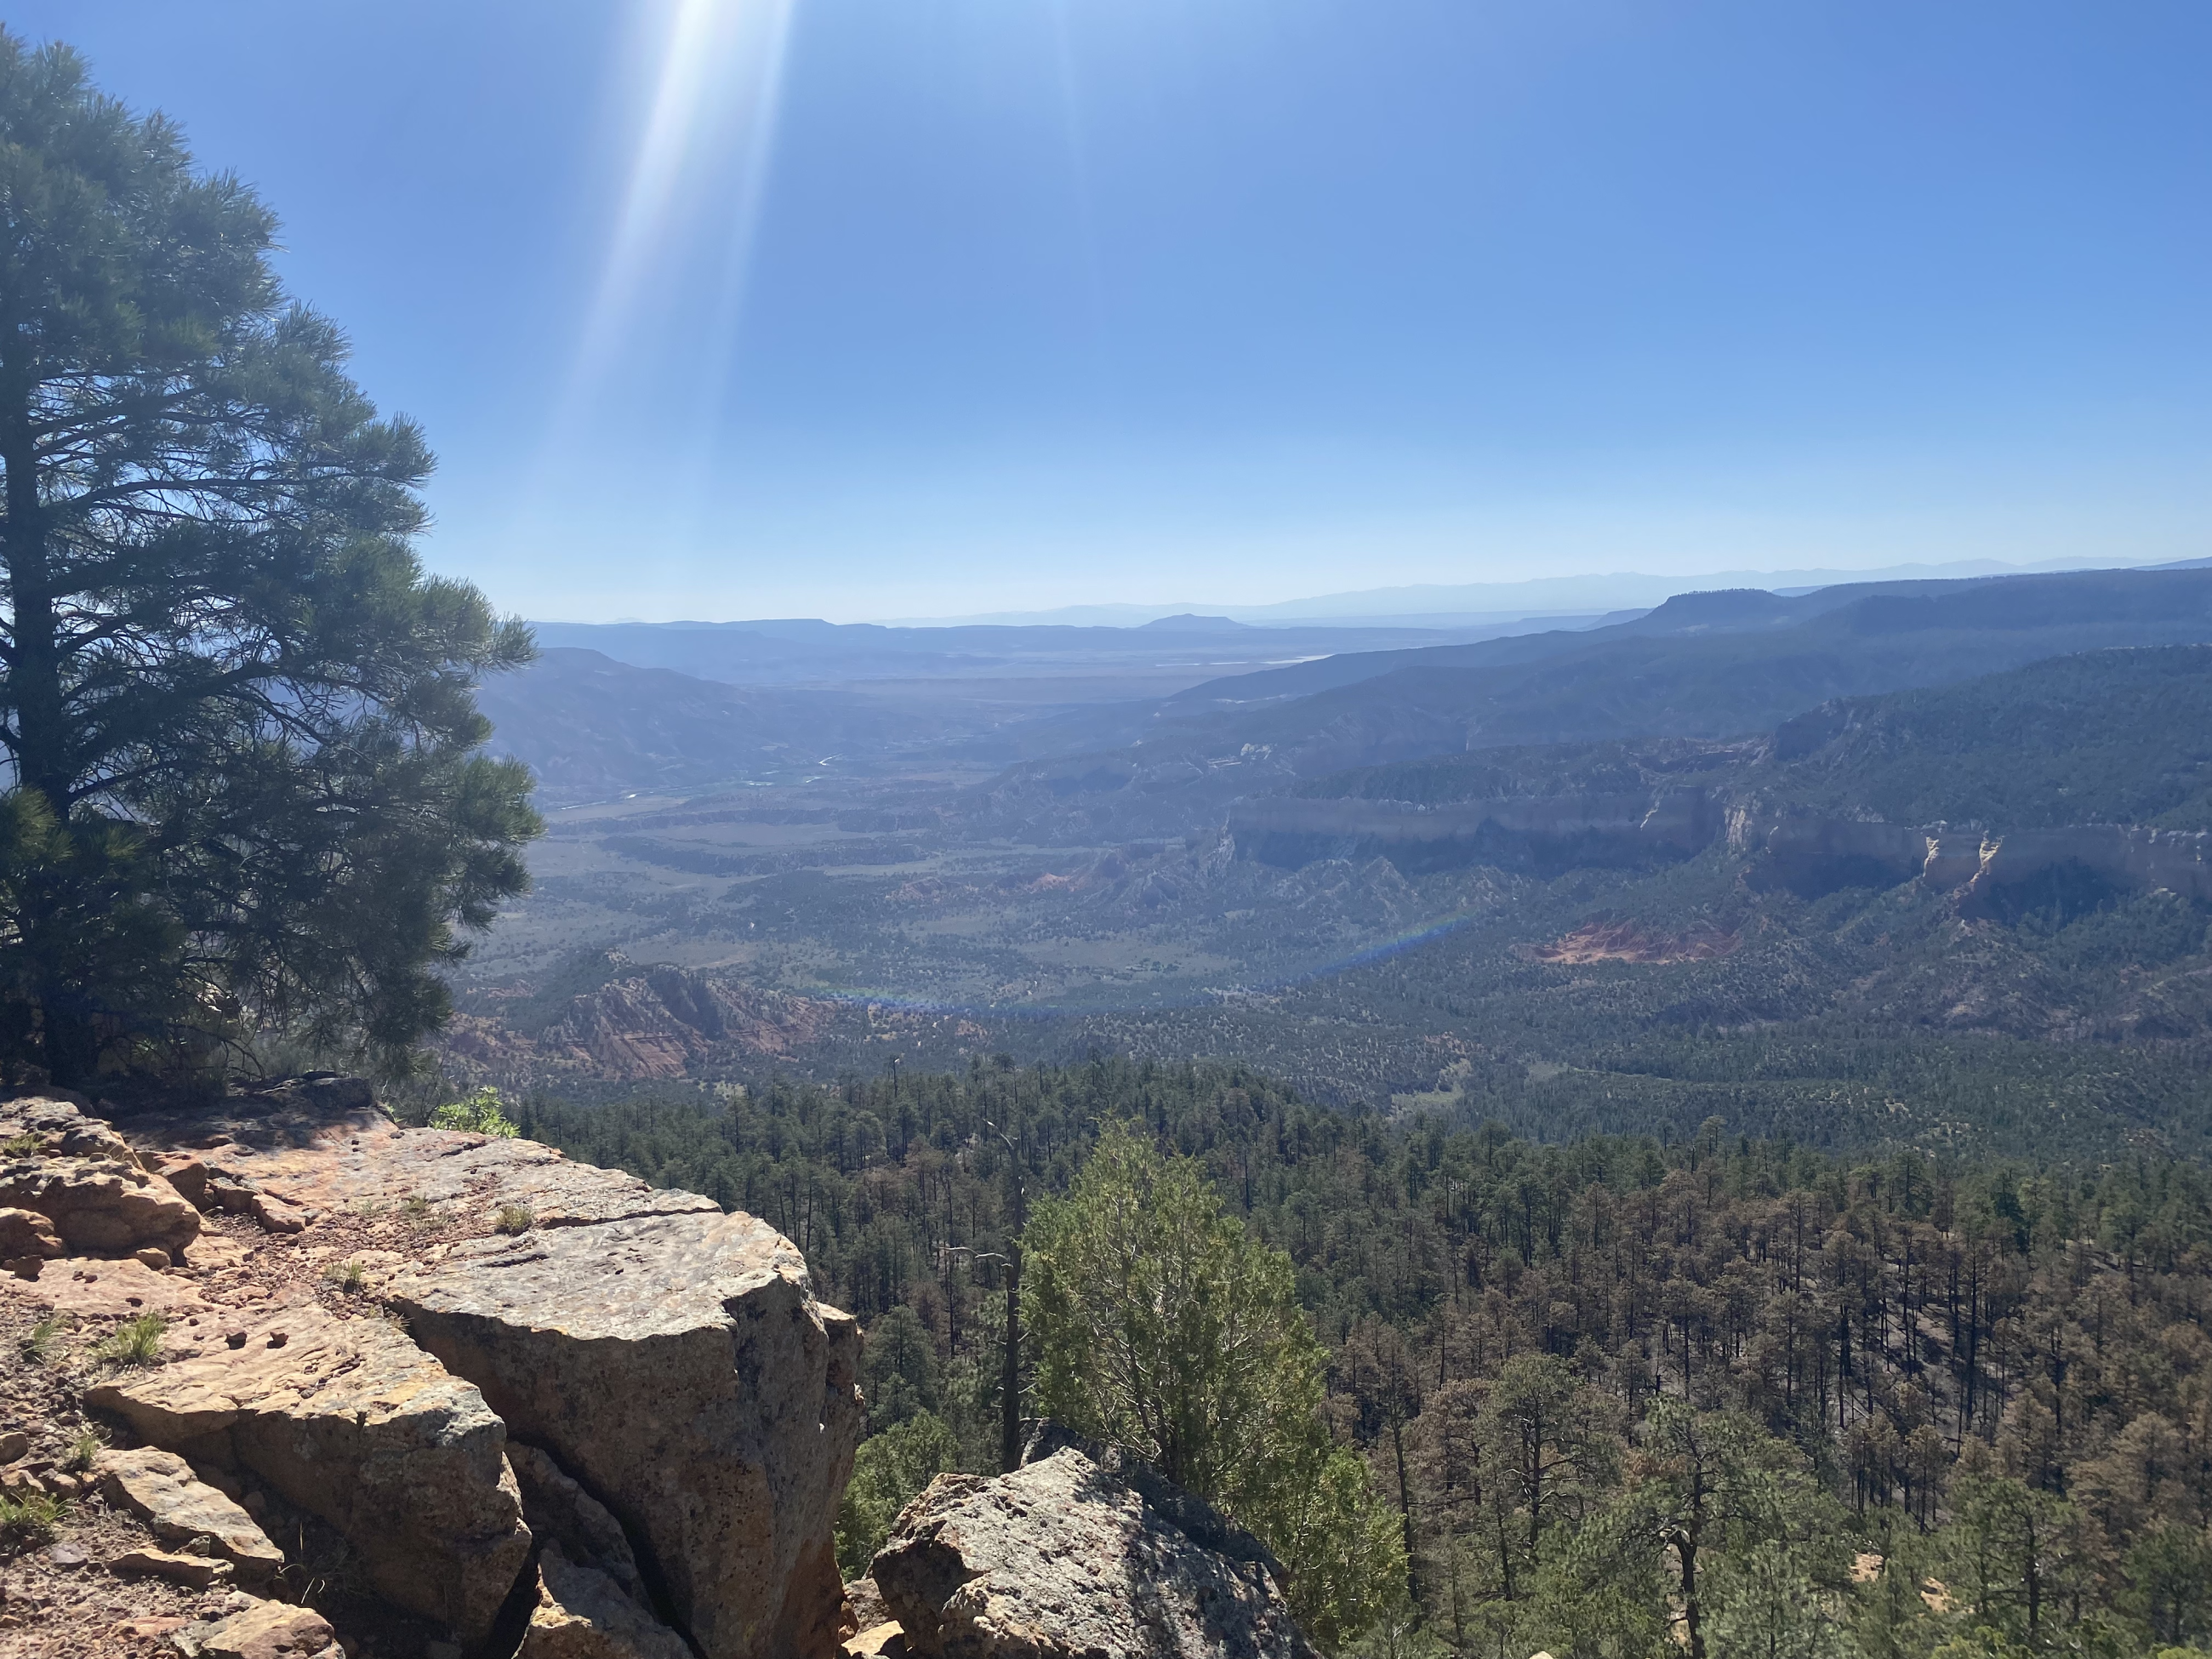 A landscape view of the Indios Fire, looking out from a rock outcrop over the forest.